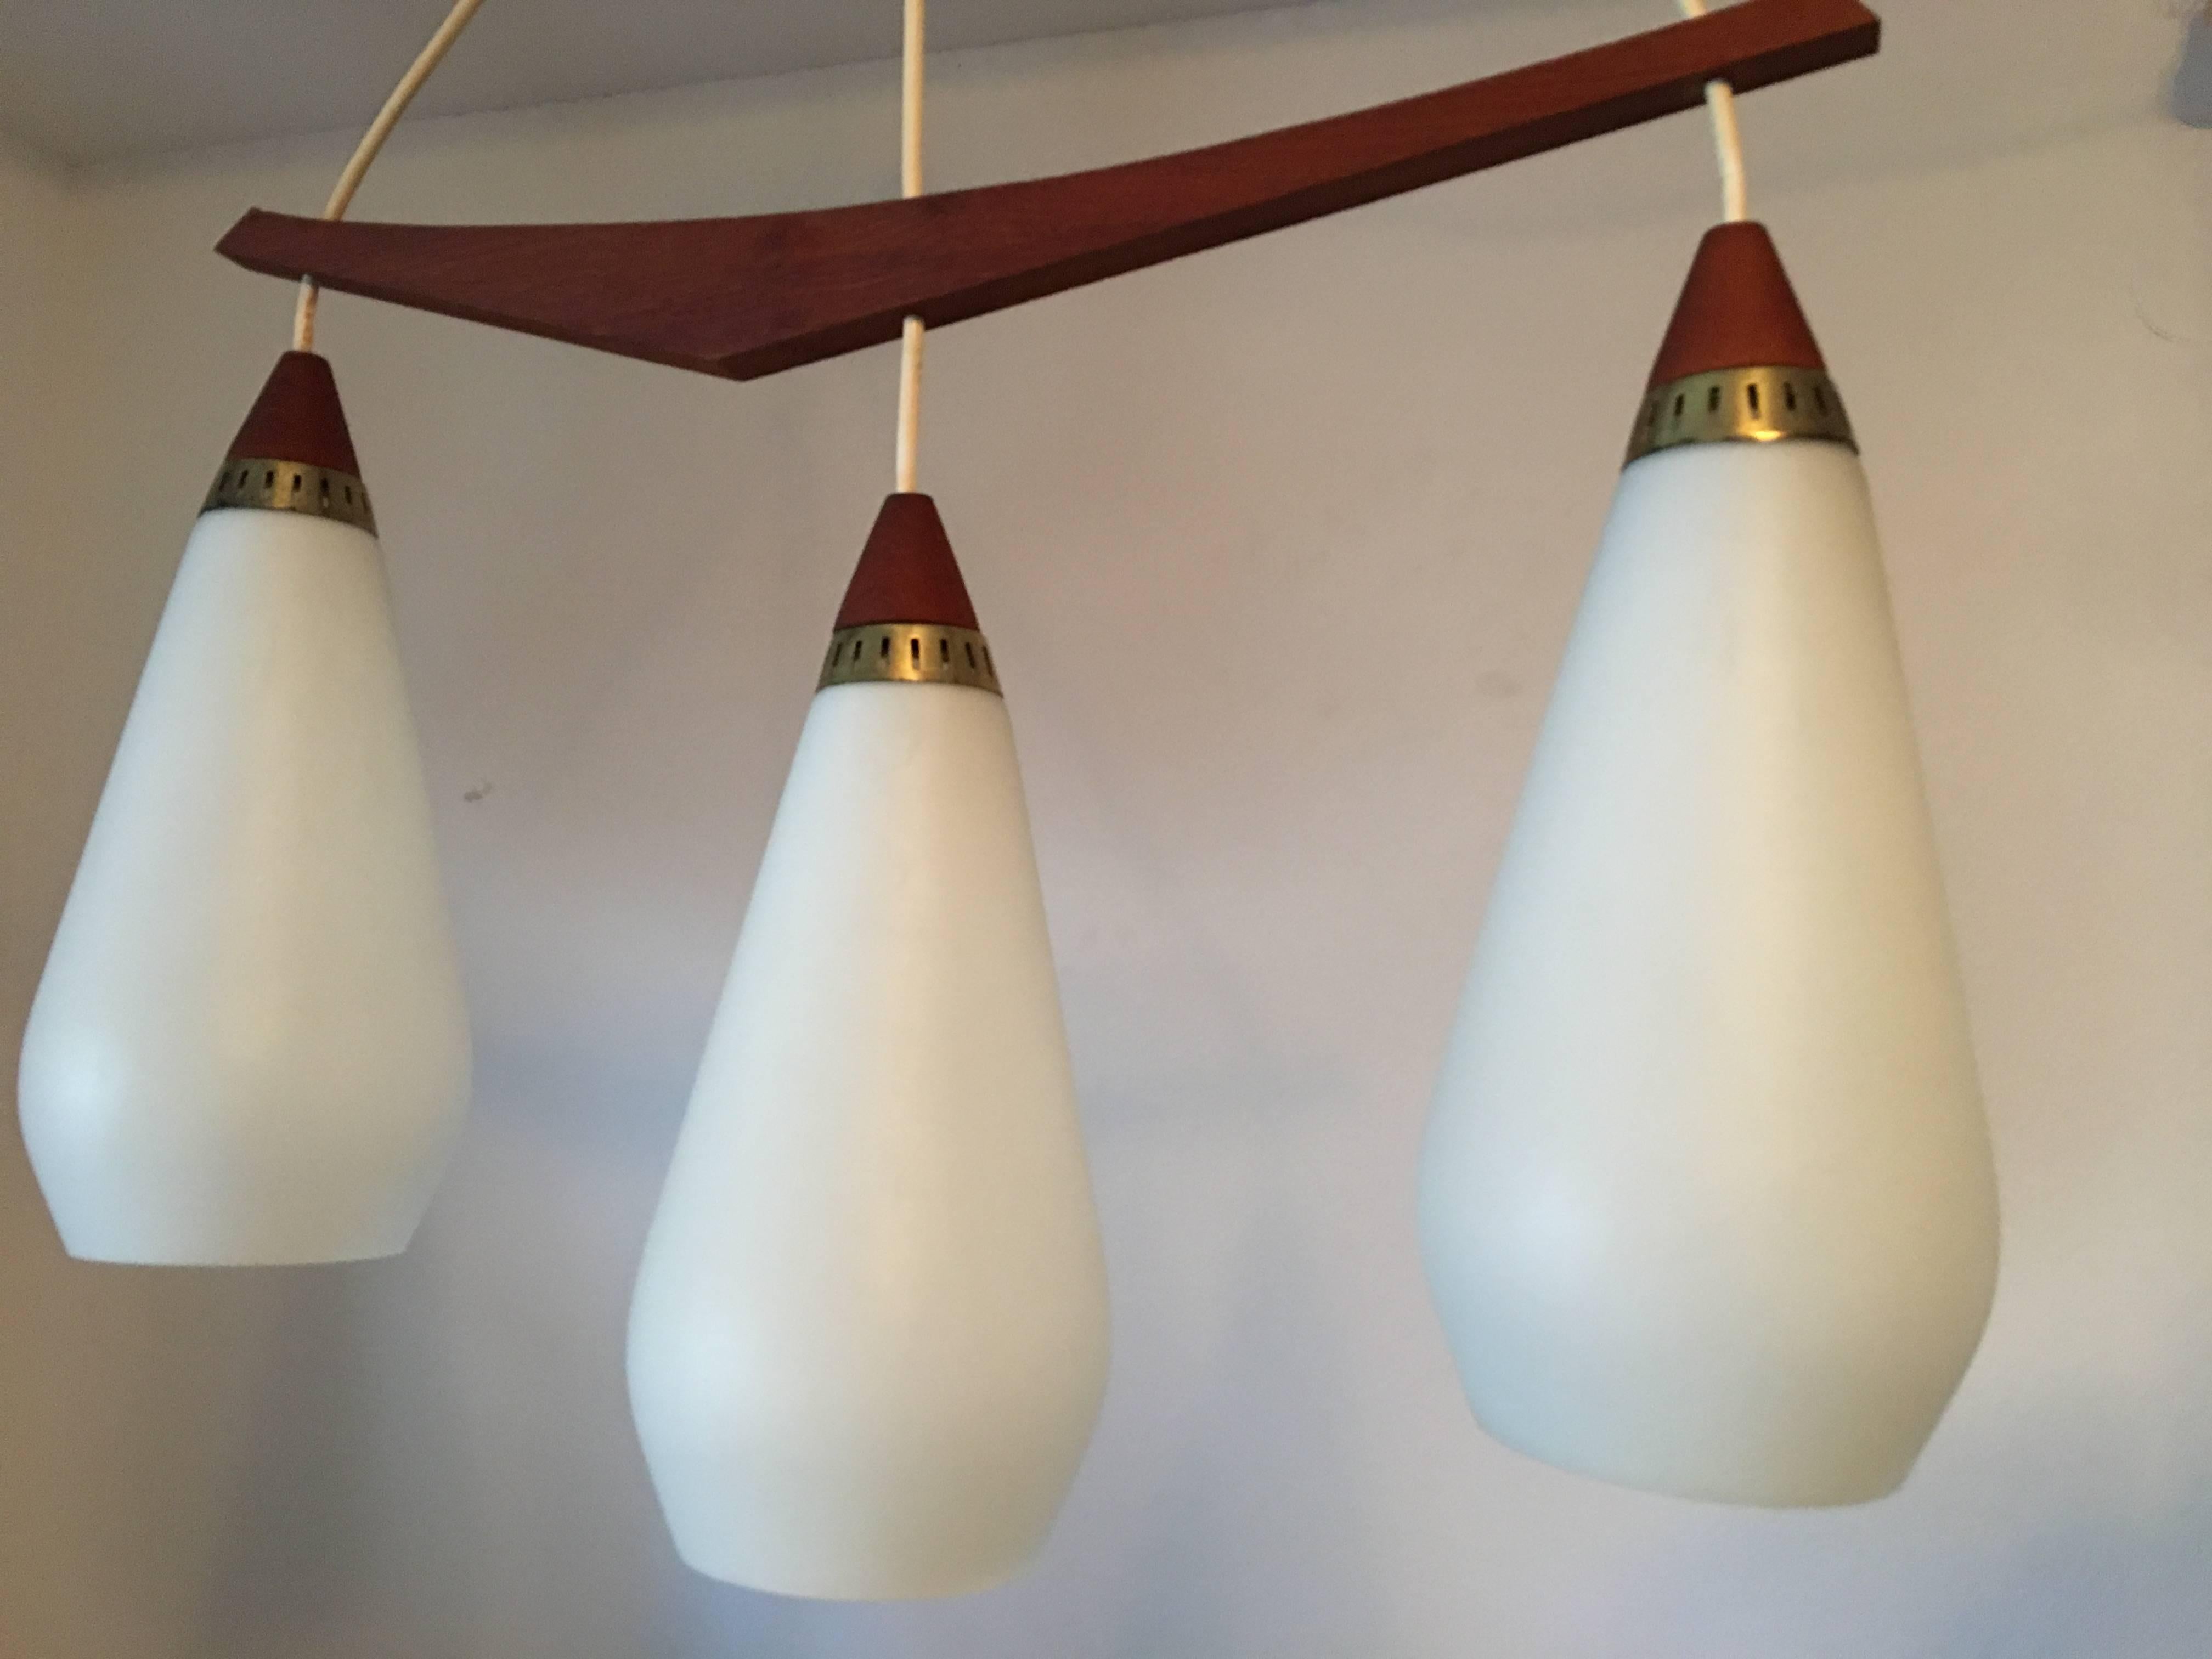 Danish modern chandelier made of lovely Teak with three milk glass lights. With its clear and sharp form it reflects the beautiful interplay between the wood and the lit up milk glass. A true representation of a classic 1960s design. It requires